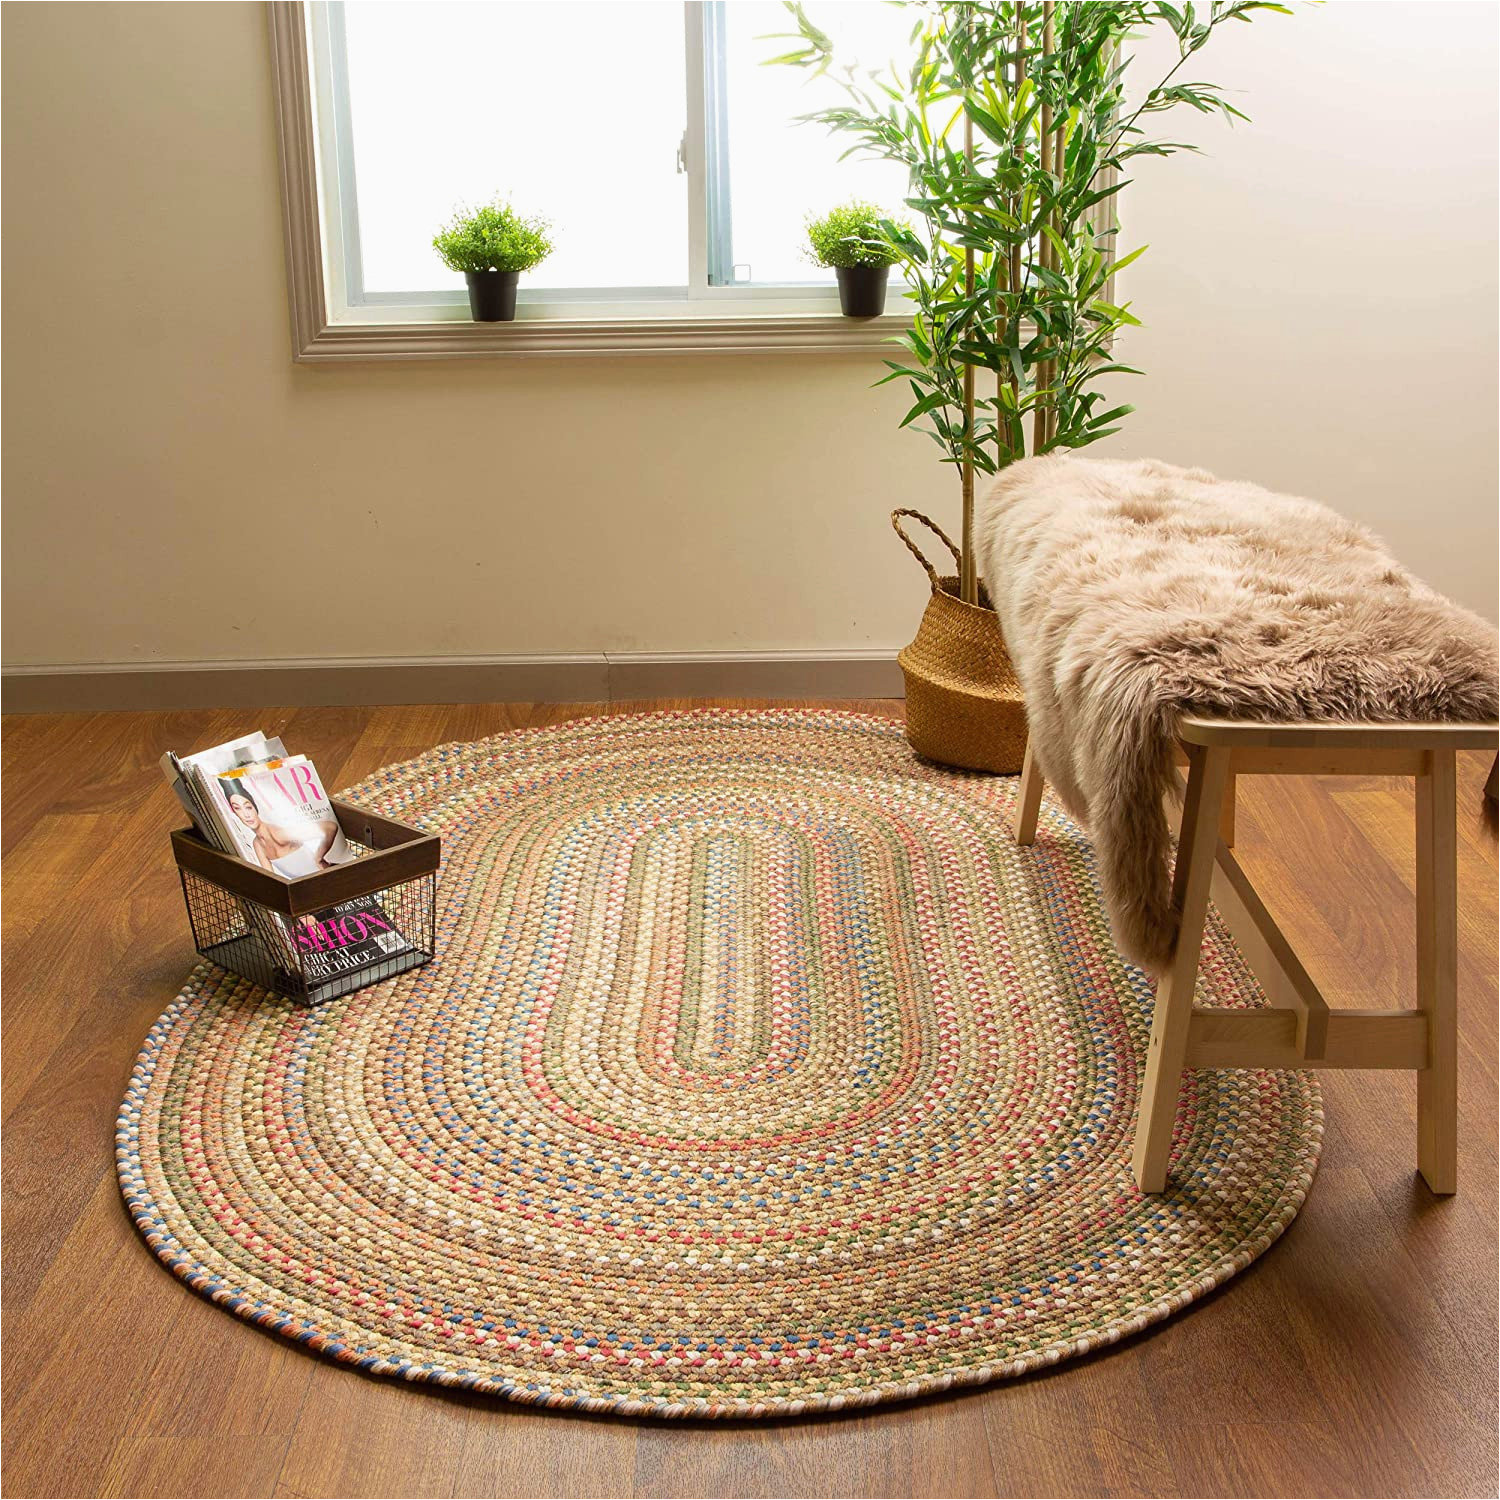 Large Oval Braided area Rugs Super area Rugs Roxbury American Made Braided Rug for Indoor Outdoor Spaces, Straw Beige / Natural Multi, 2′ X 3′ Oval